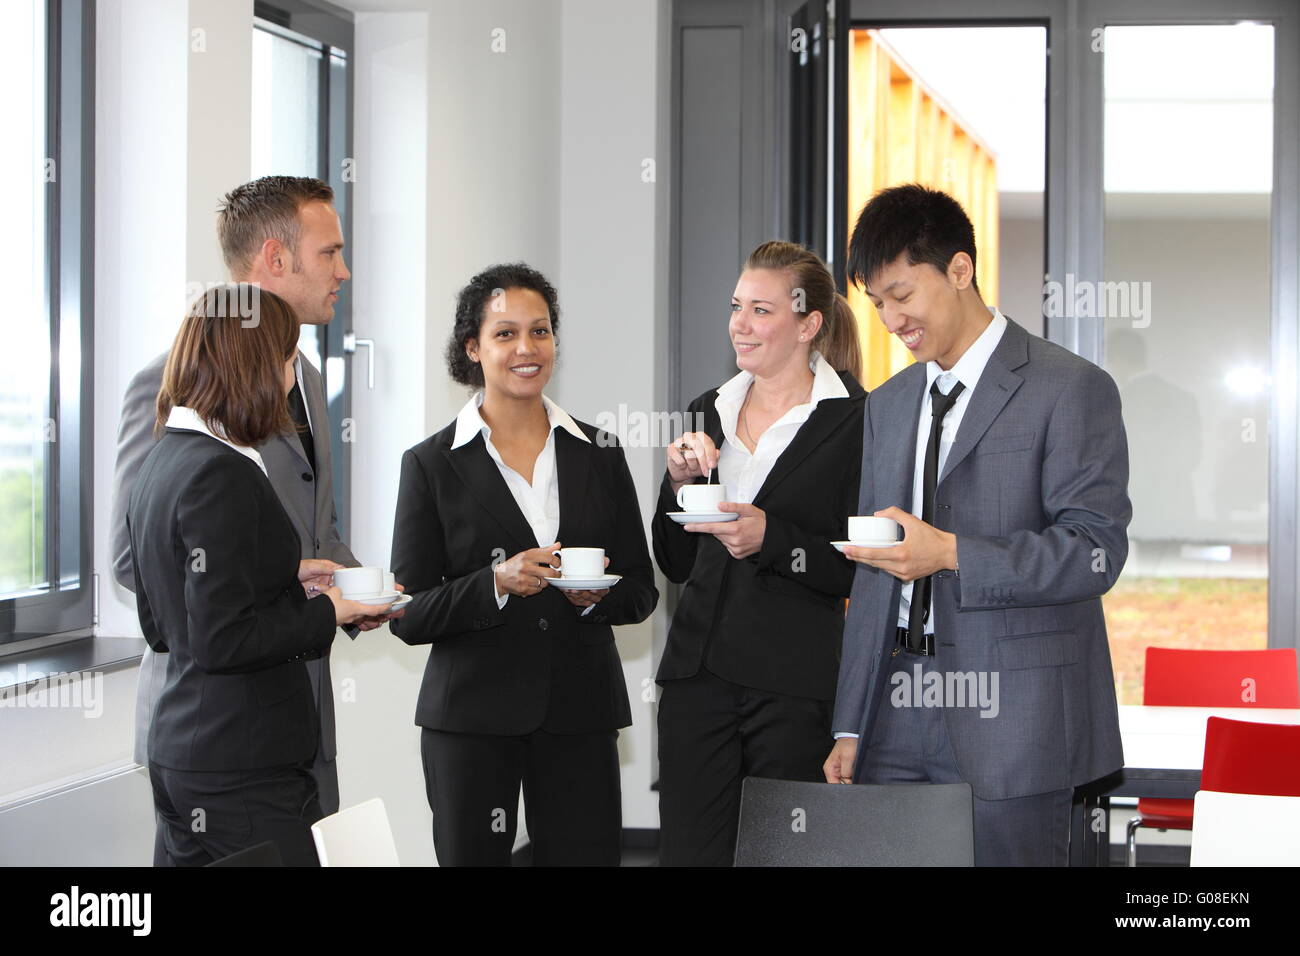 Group of diverse businesspeople on coffee break Stock Photo